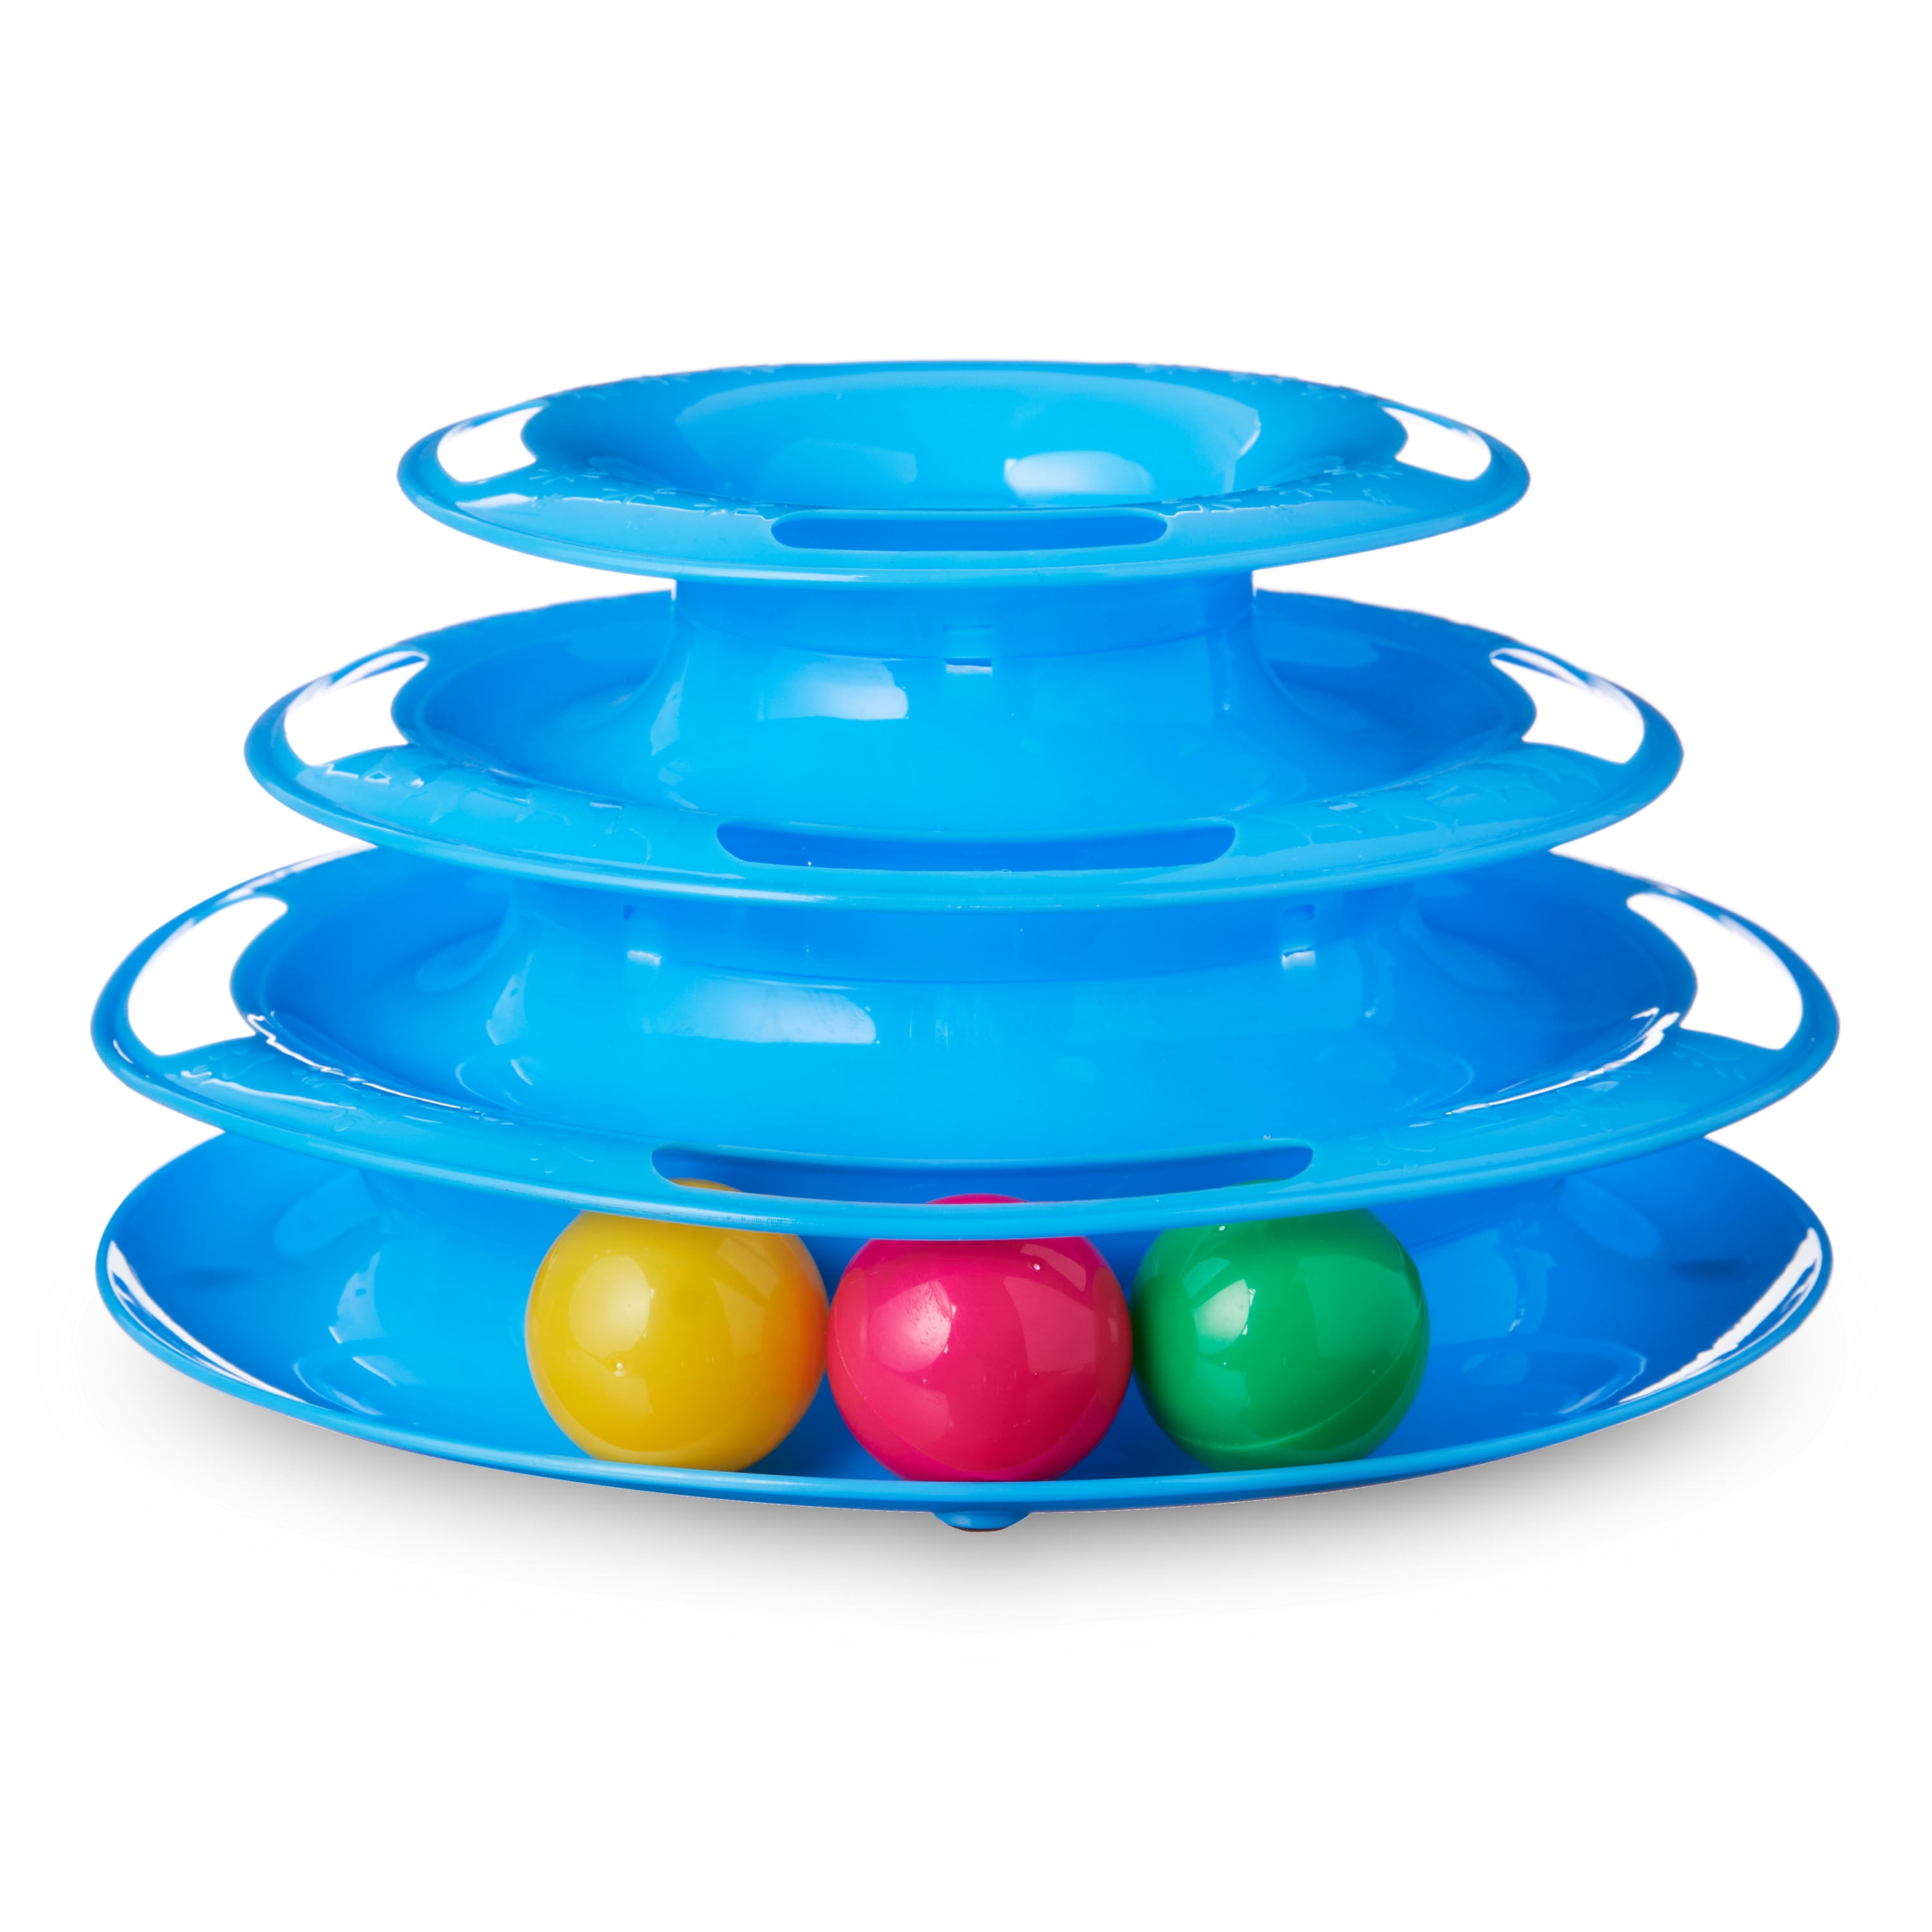 Tower of Tracks Interactive 3-Tier Cat Toy, Multi